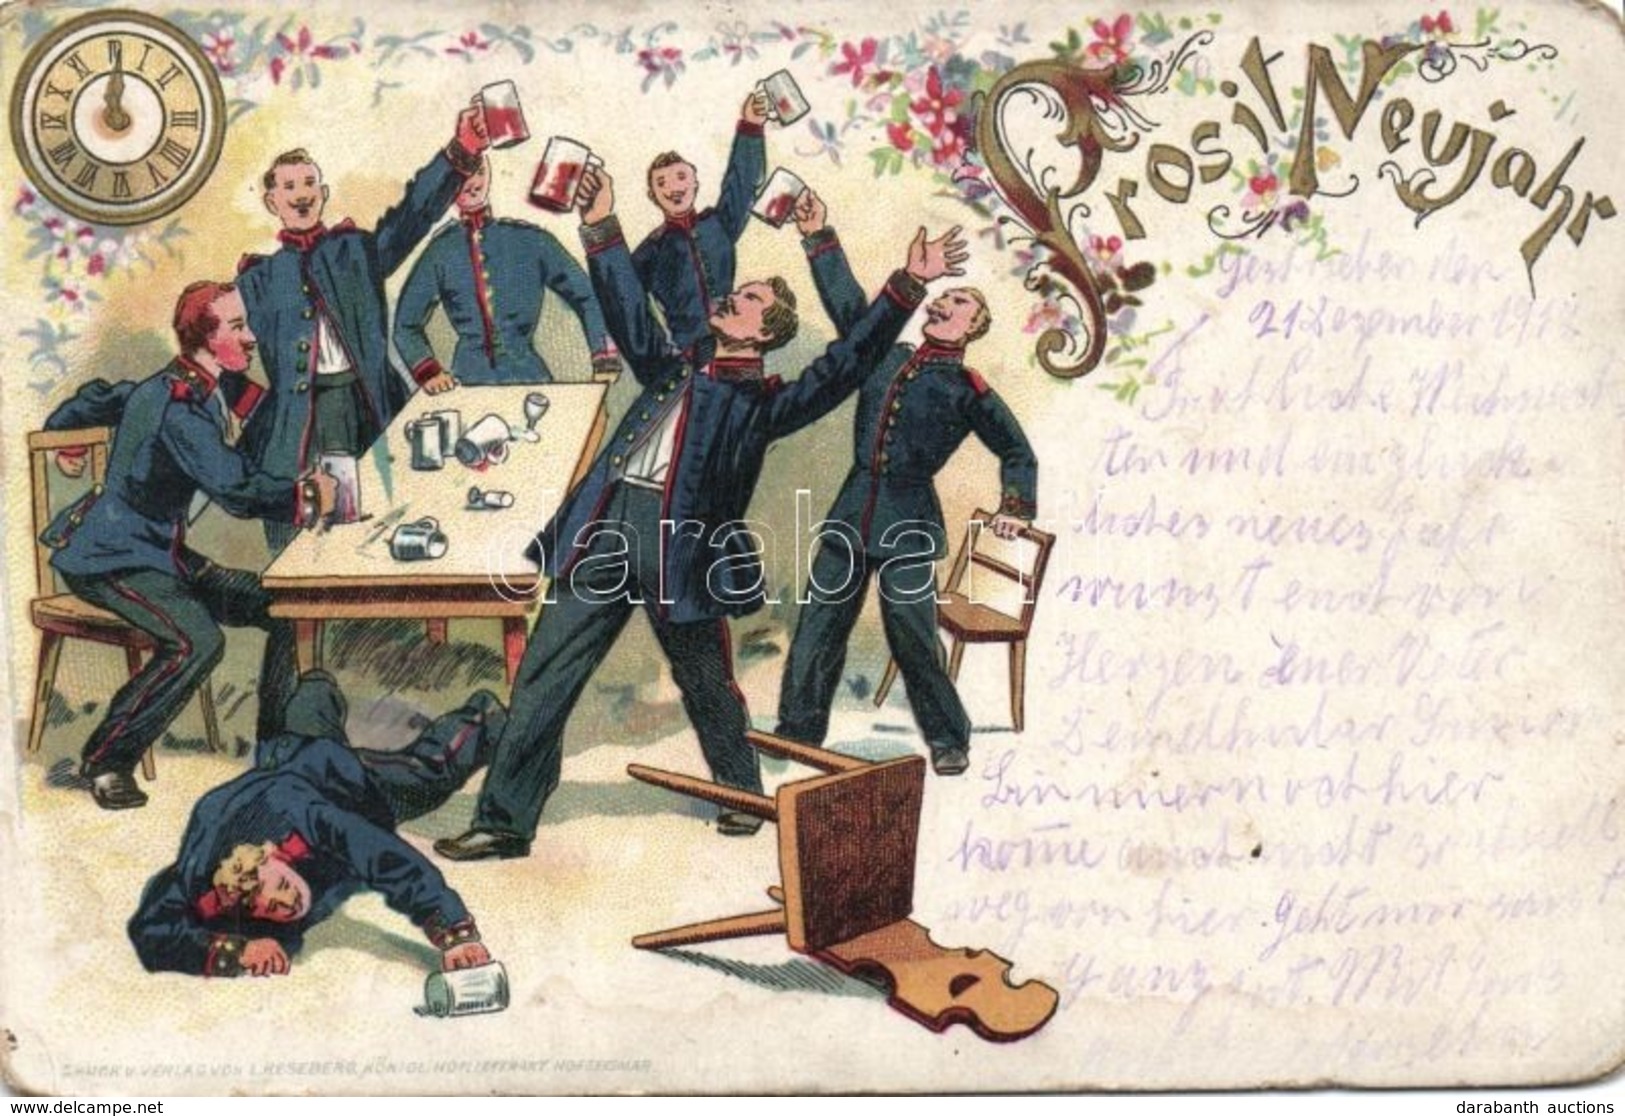 T2/T3 Prosit Neujahr / German Military New Year Greeting Art Postcard With Drunk Soldiers. Floral Litho L. Keseberg (wor - Non Classés